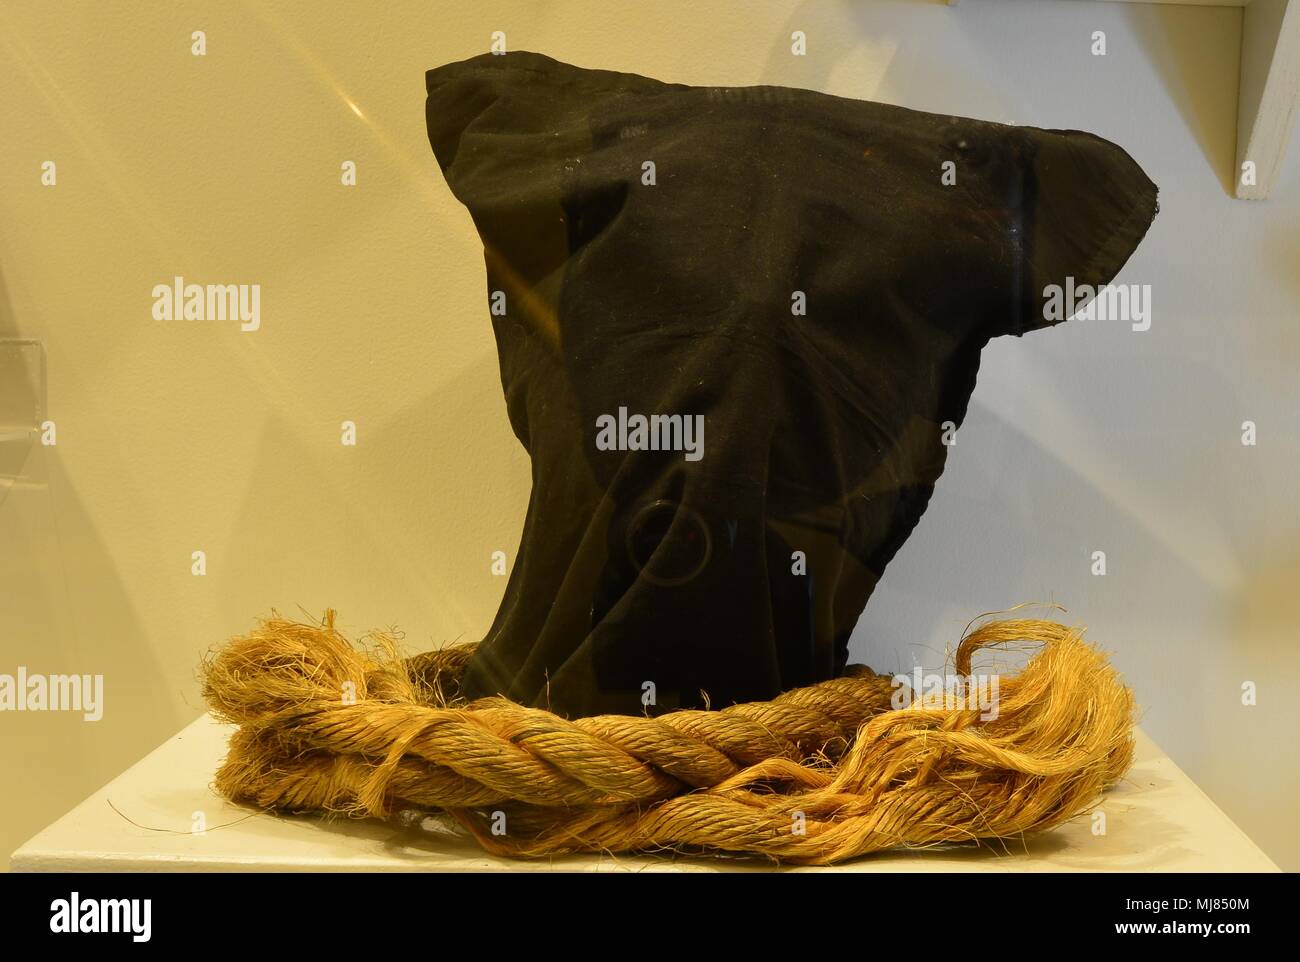 The noose and head cover used in a Hanging in Georgia Stock Photo